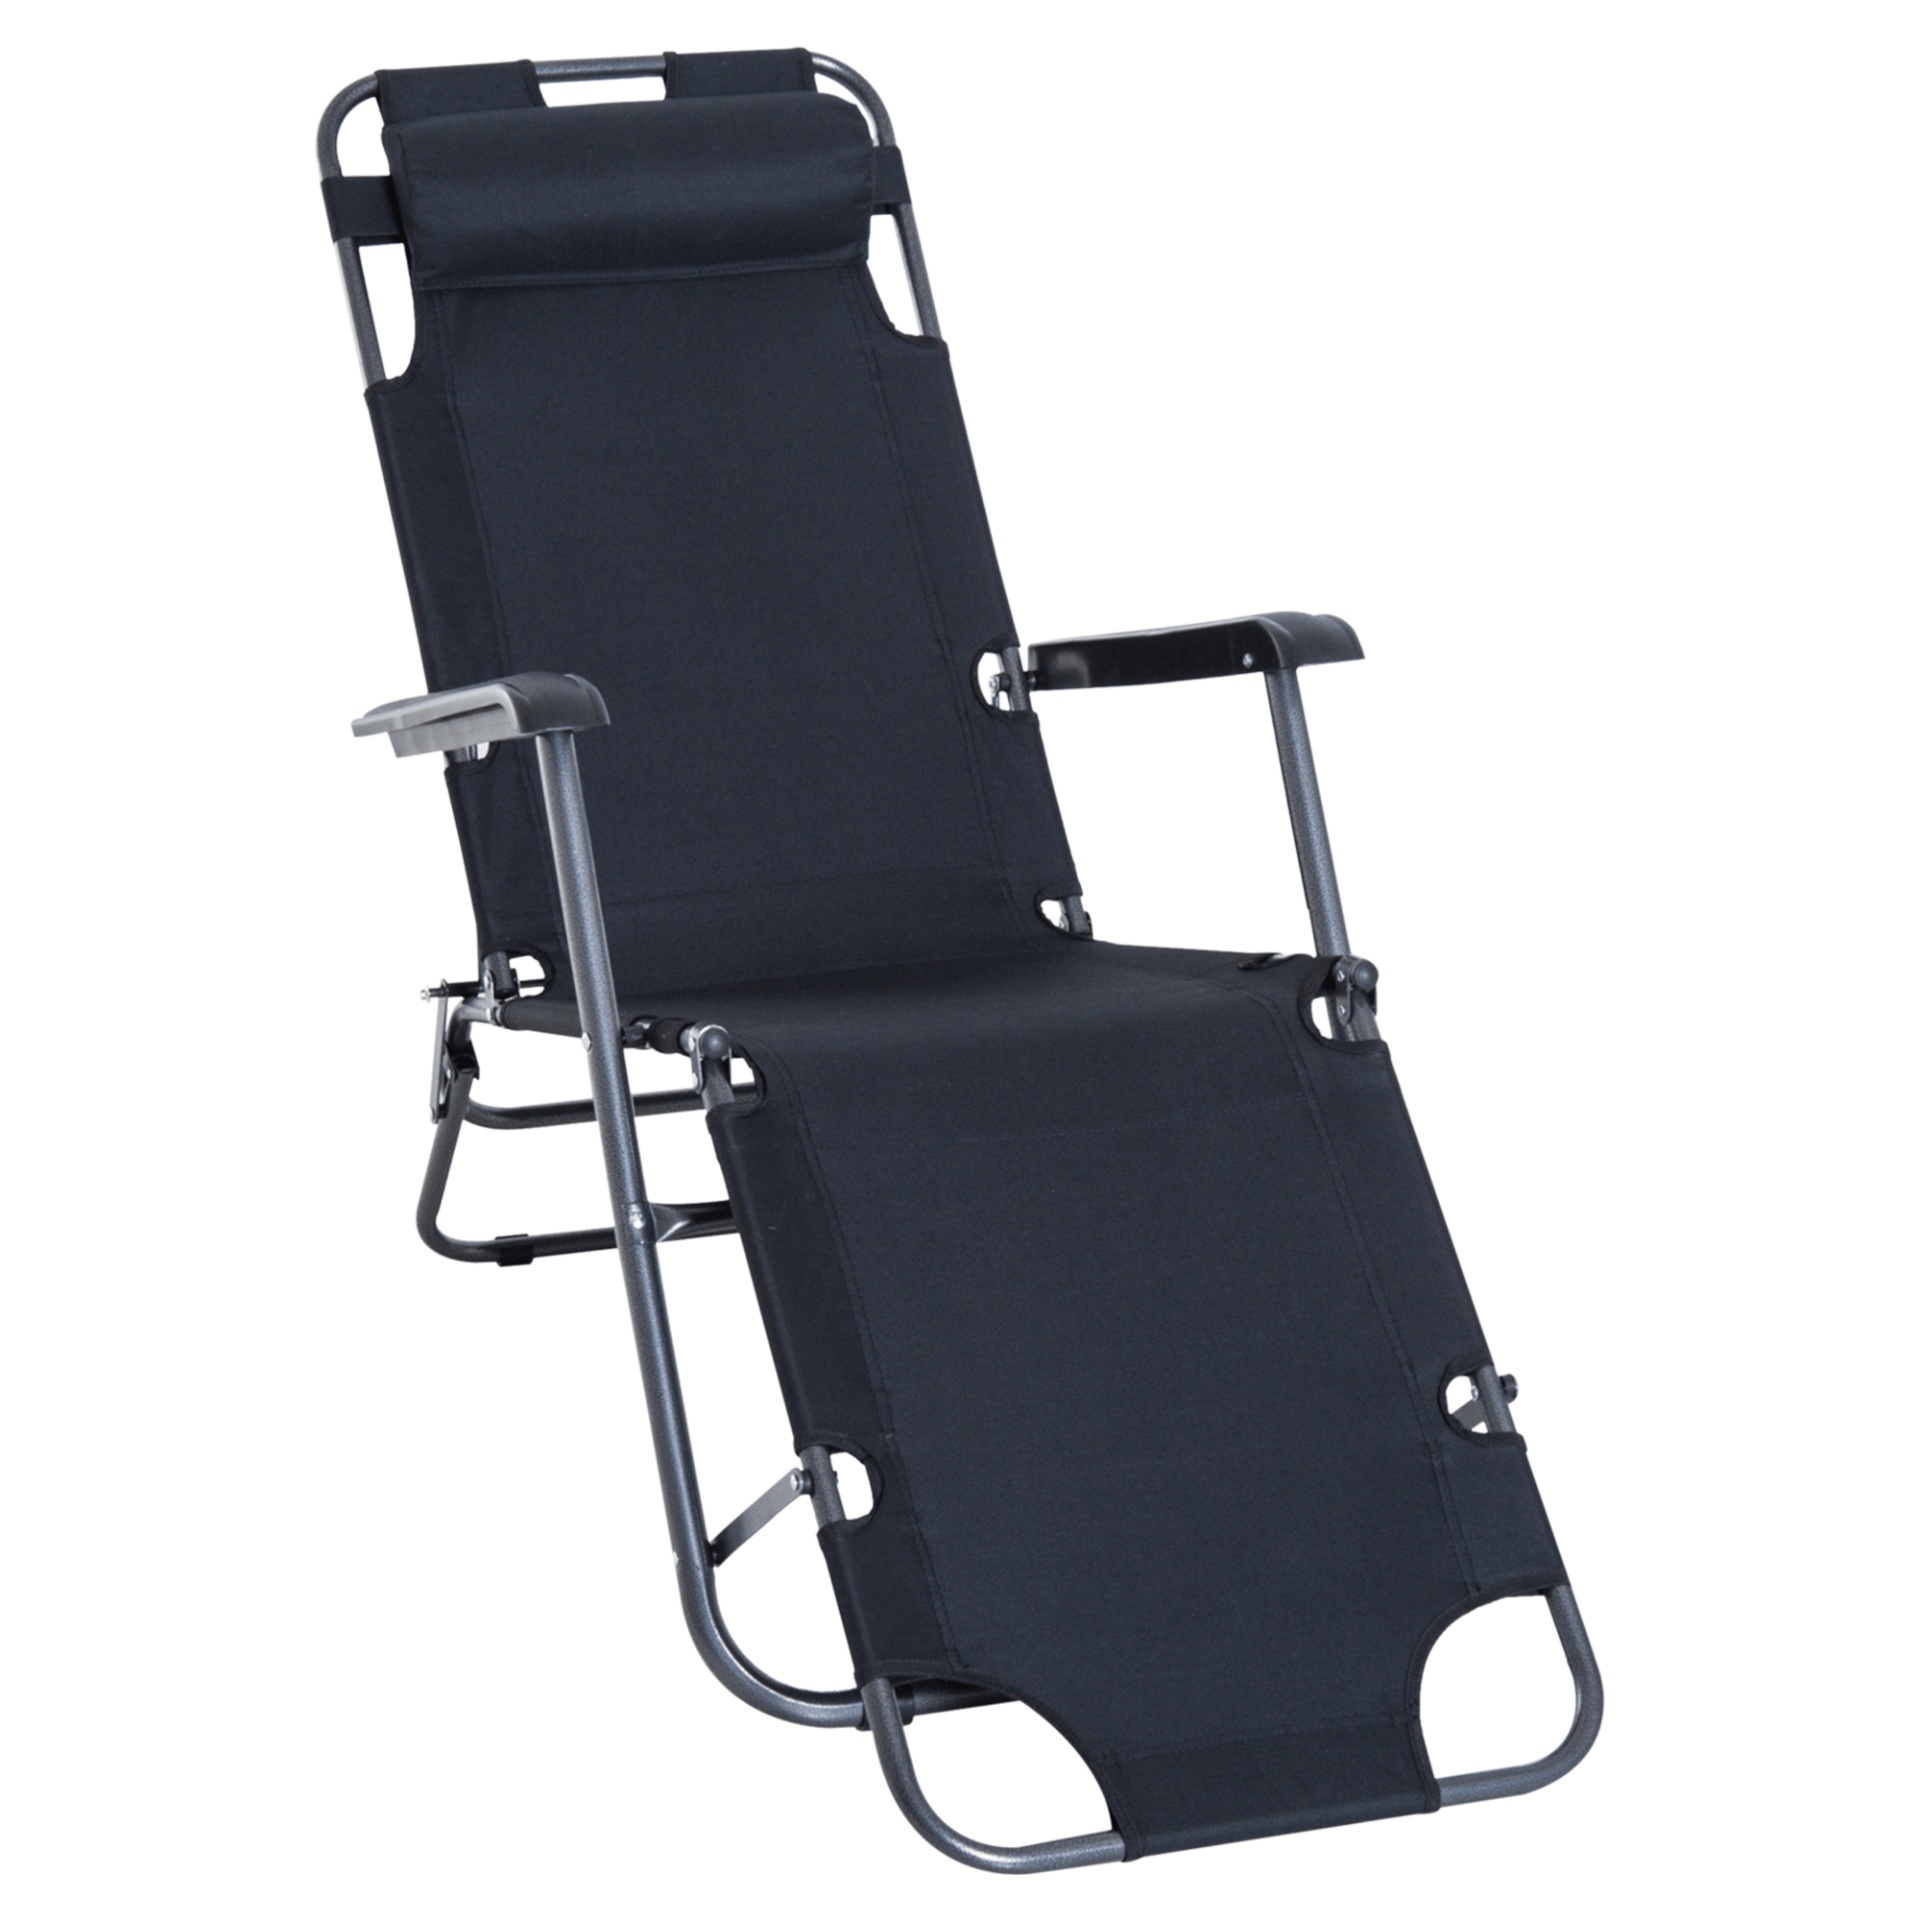 Outsunny 2 in 1 Sun Lounger Camping Chair Cosy Camping Co. Black  